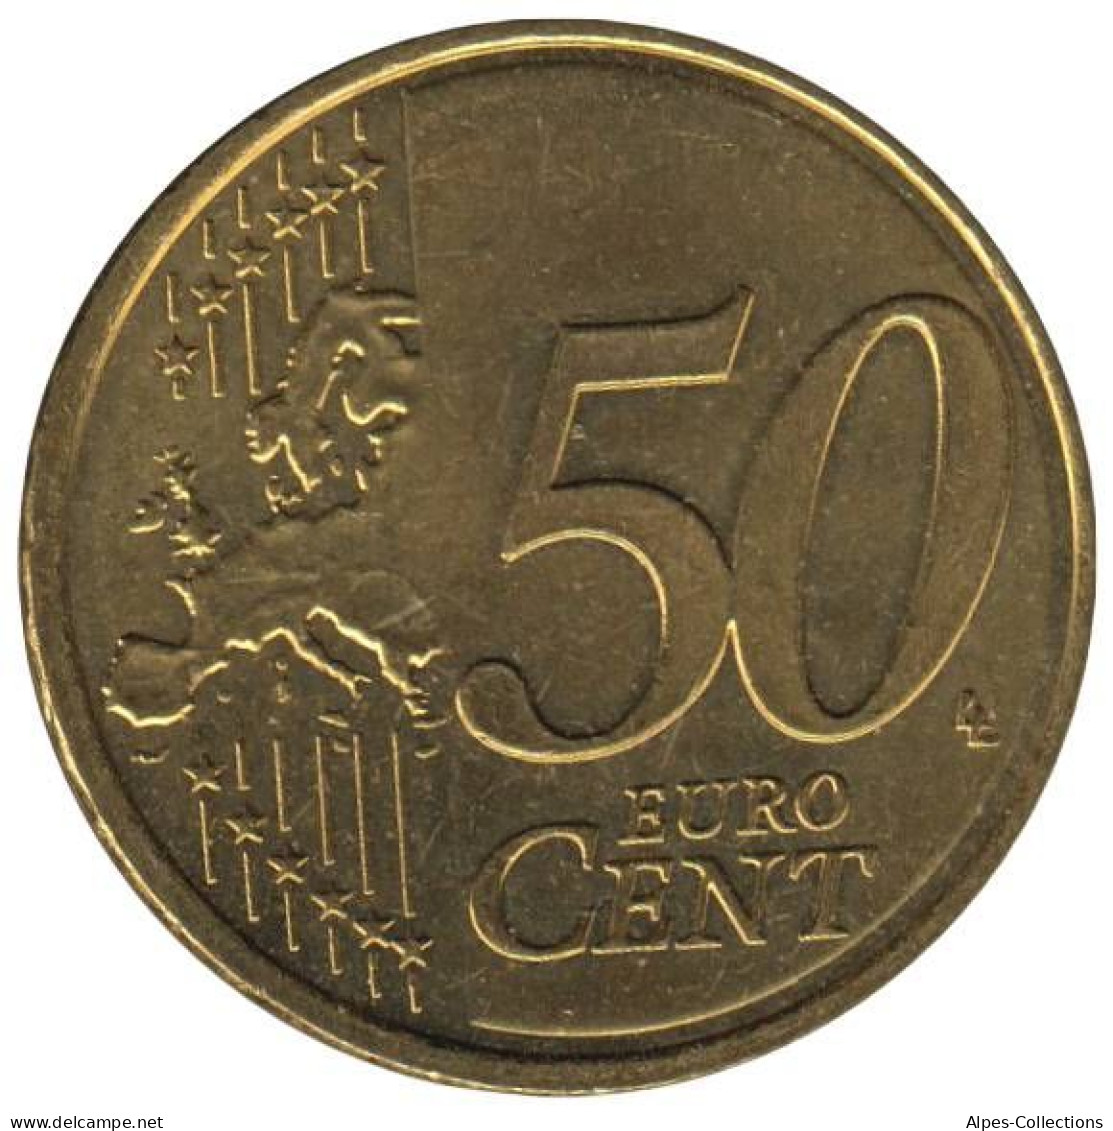 AN05018.1 - ANDORRE - 50 Cents D'euro - 2018 - Andorre